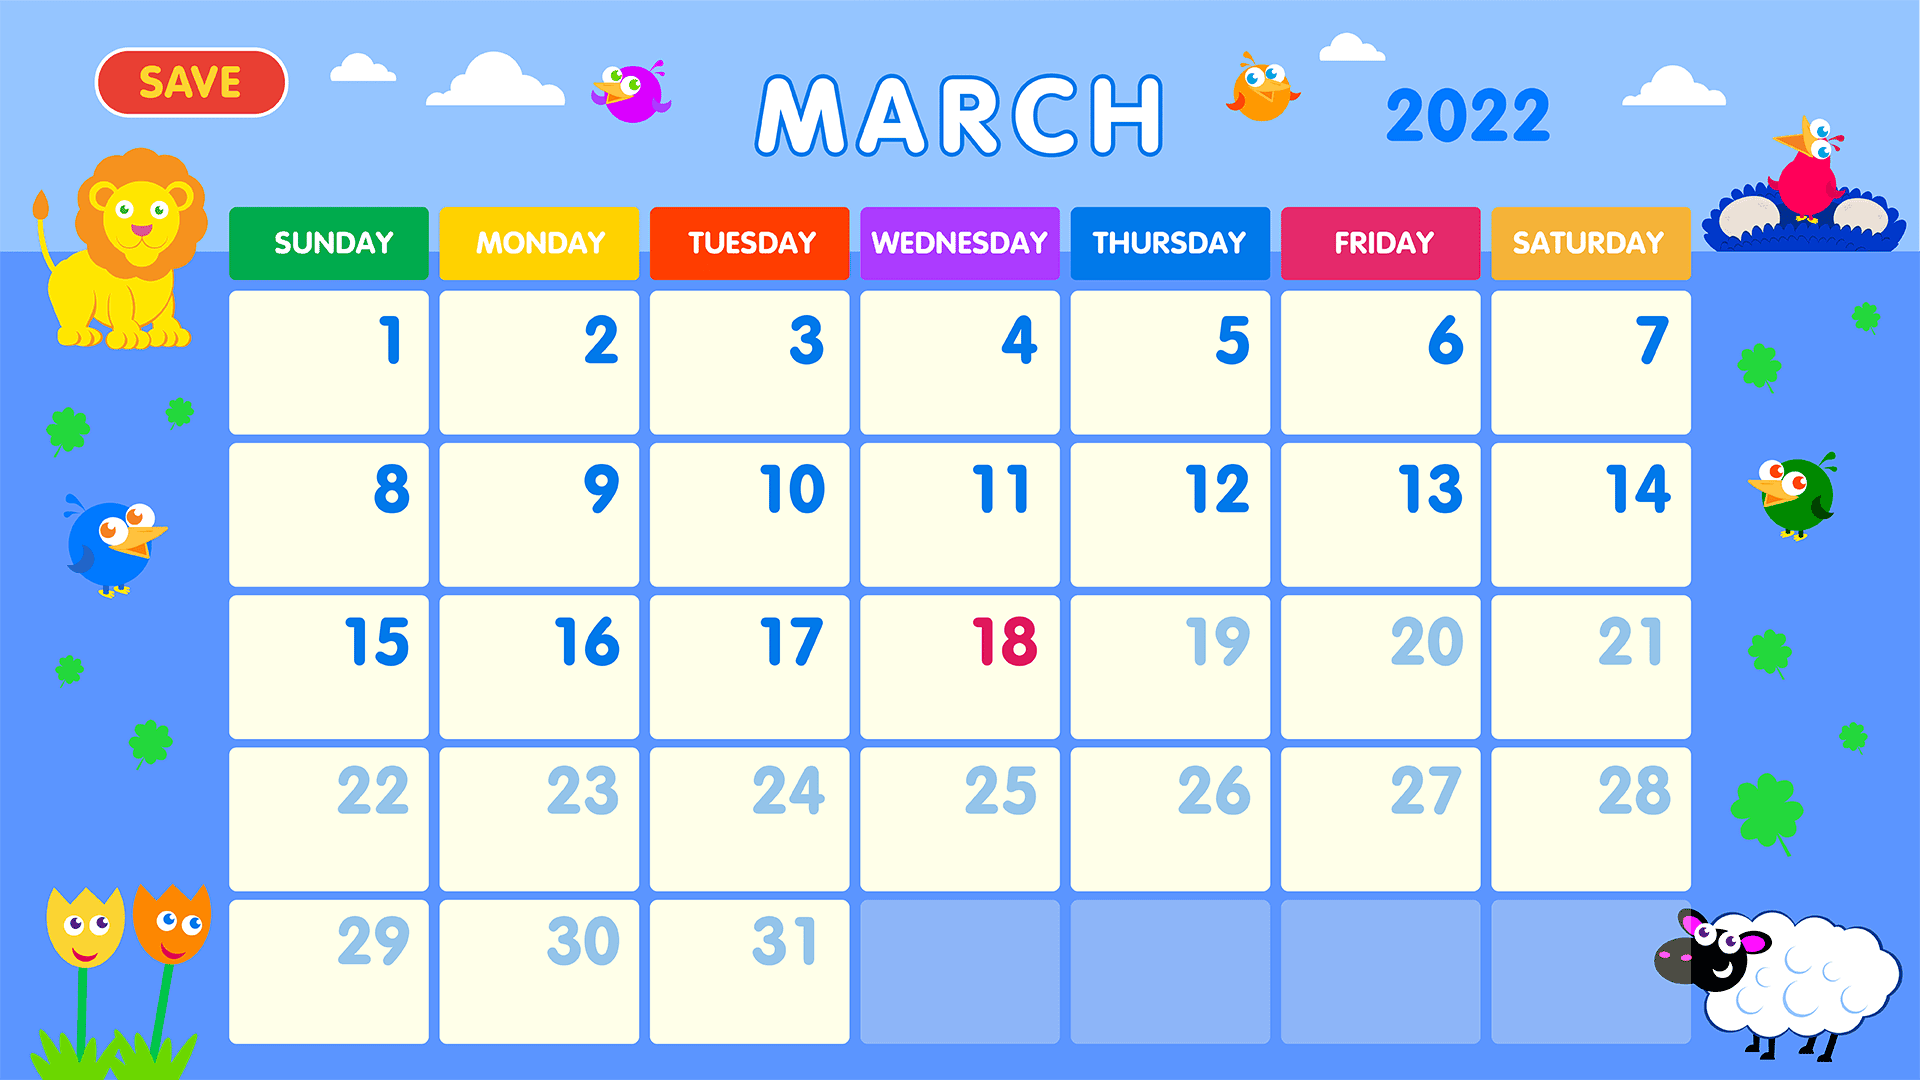 Calendar Month example March